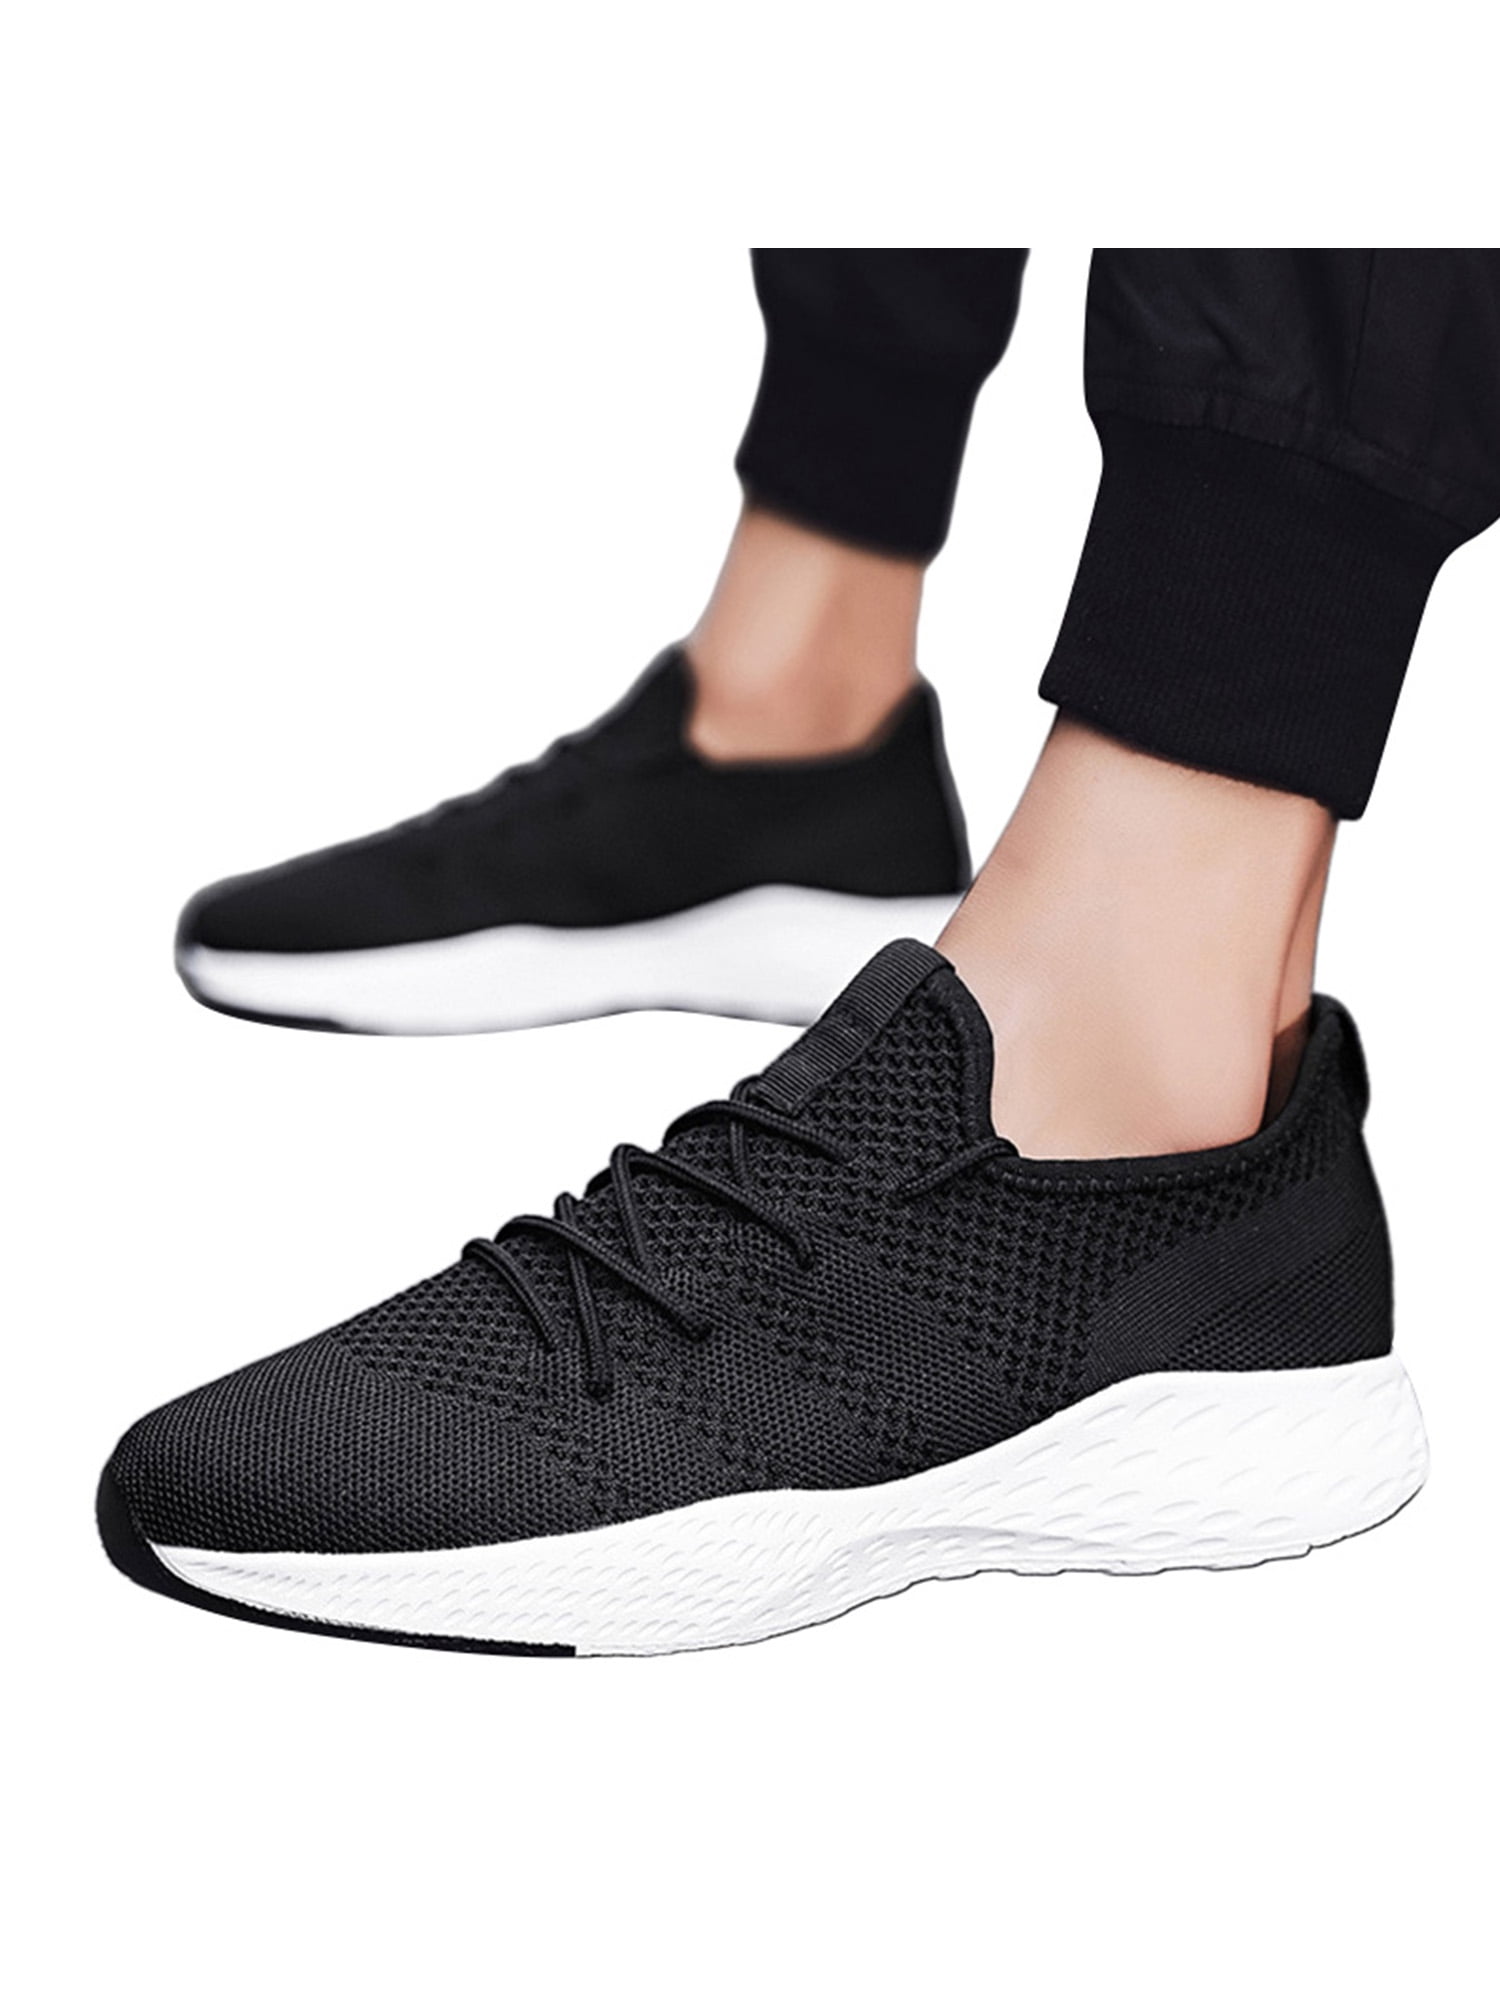 Mens Comfortable Athletic Sneakers Breathable Fashion Casual Running Sport Shoes 